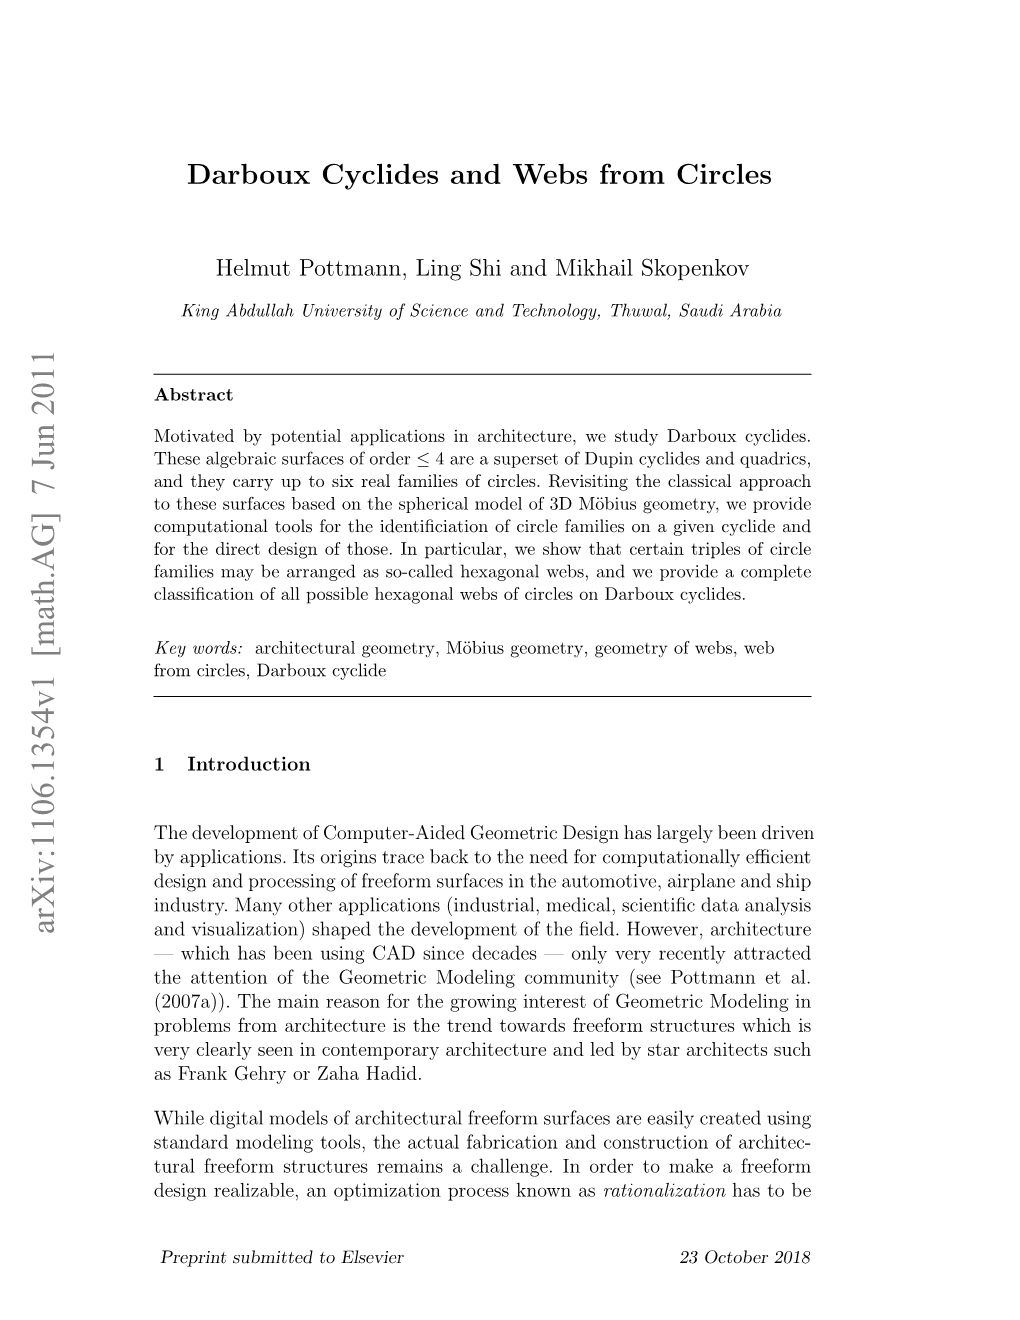 Darboux Cyclides and Webs from Circles